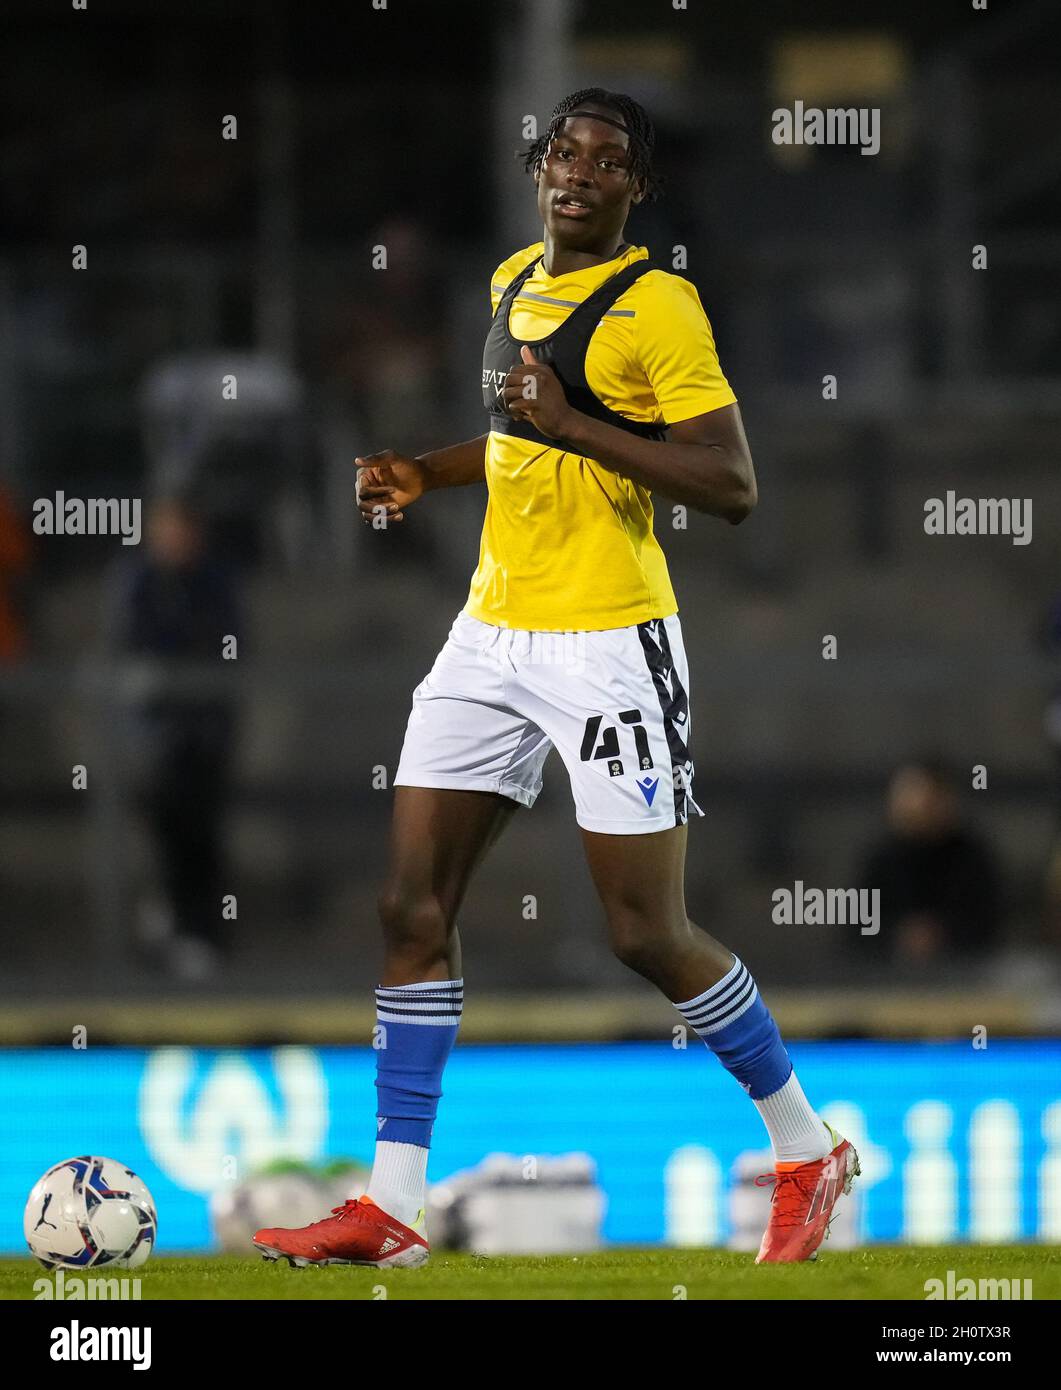 Bristol, UK. 13th Oct, 2021. Jarmani Langlais of Bristol Rovers pre match  during the EFL 'Papa John's' Trophy match between Bristol Rovers and  Chelsea U21 at the Memorial Stadium, Bristol, England on